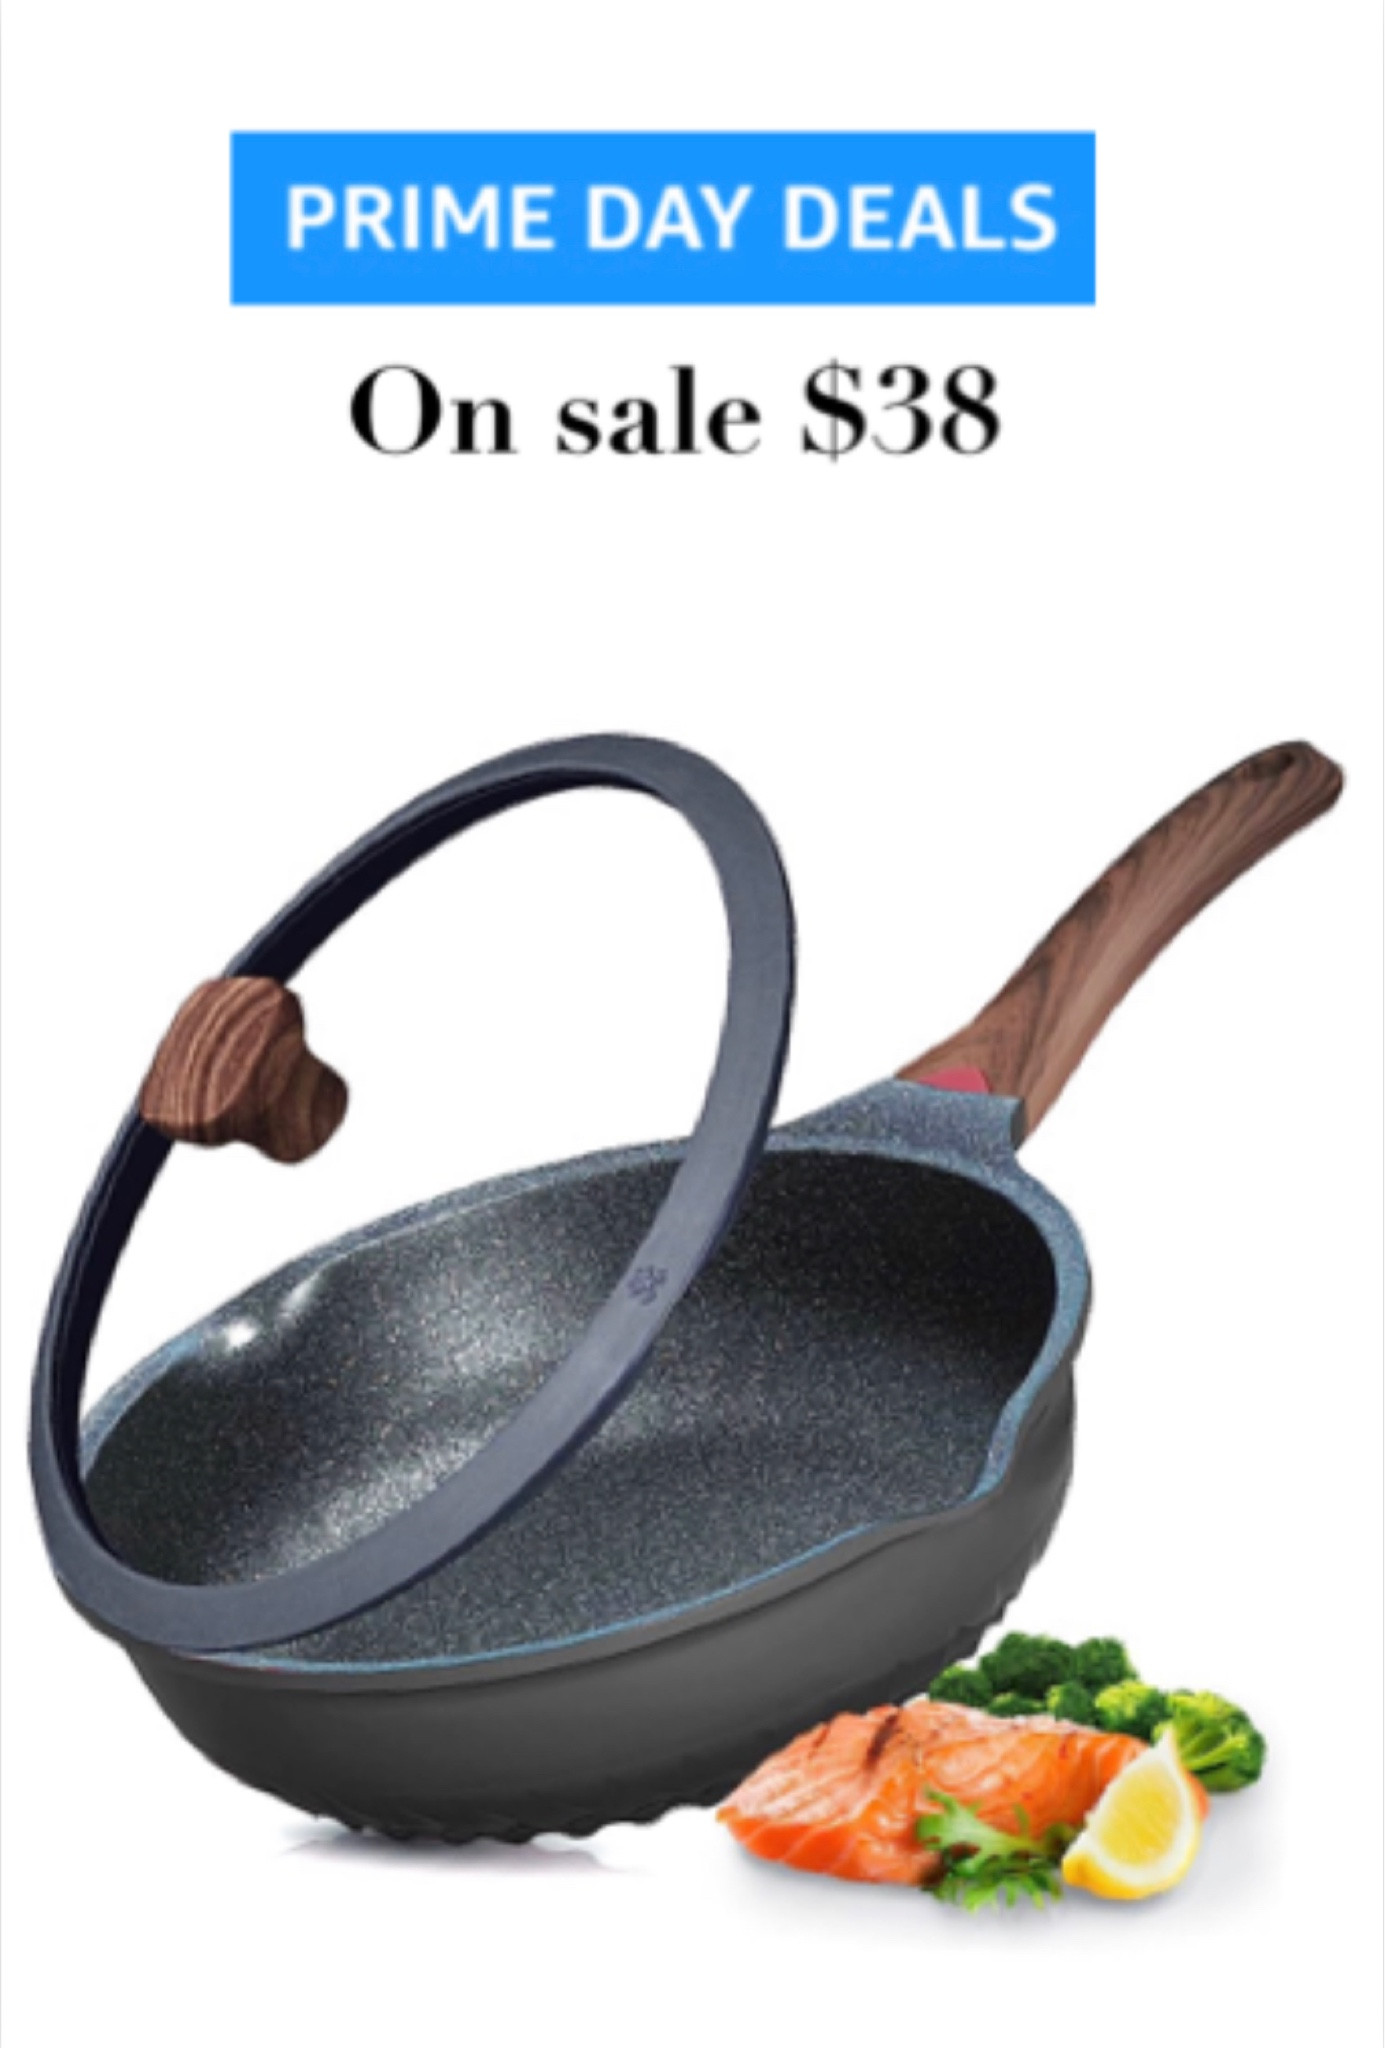 SHOULD You Buy This Pan? Vinchef Nonstick Skillet with Lid, 11In